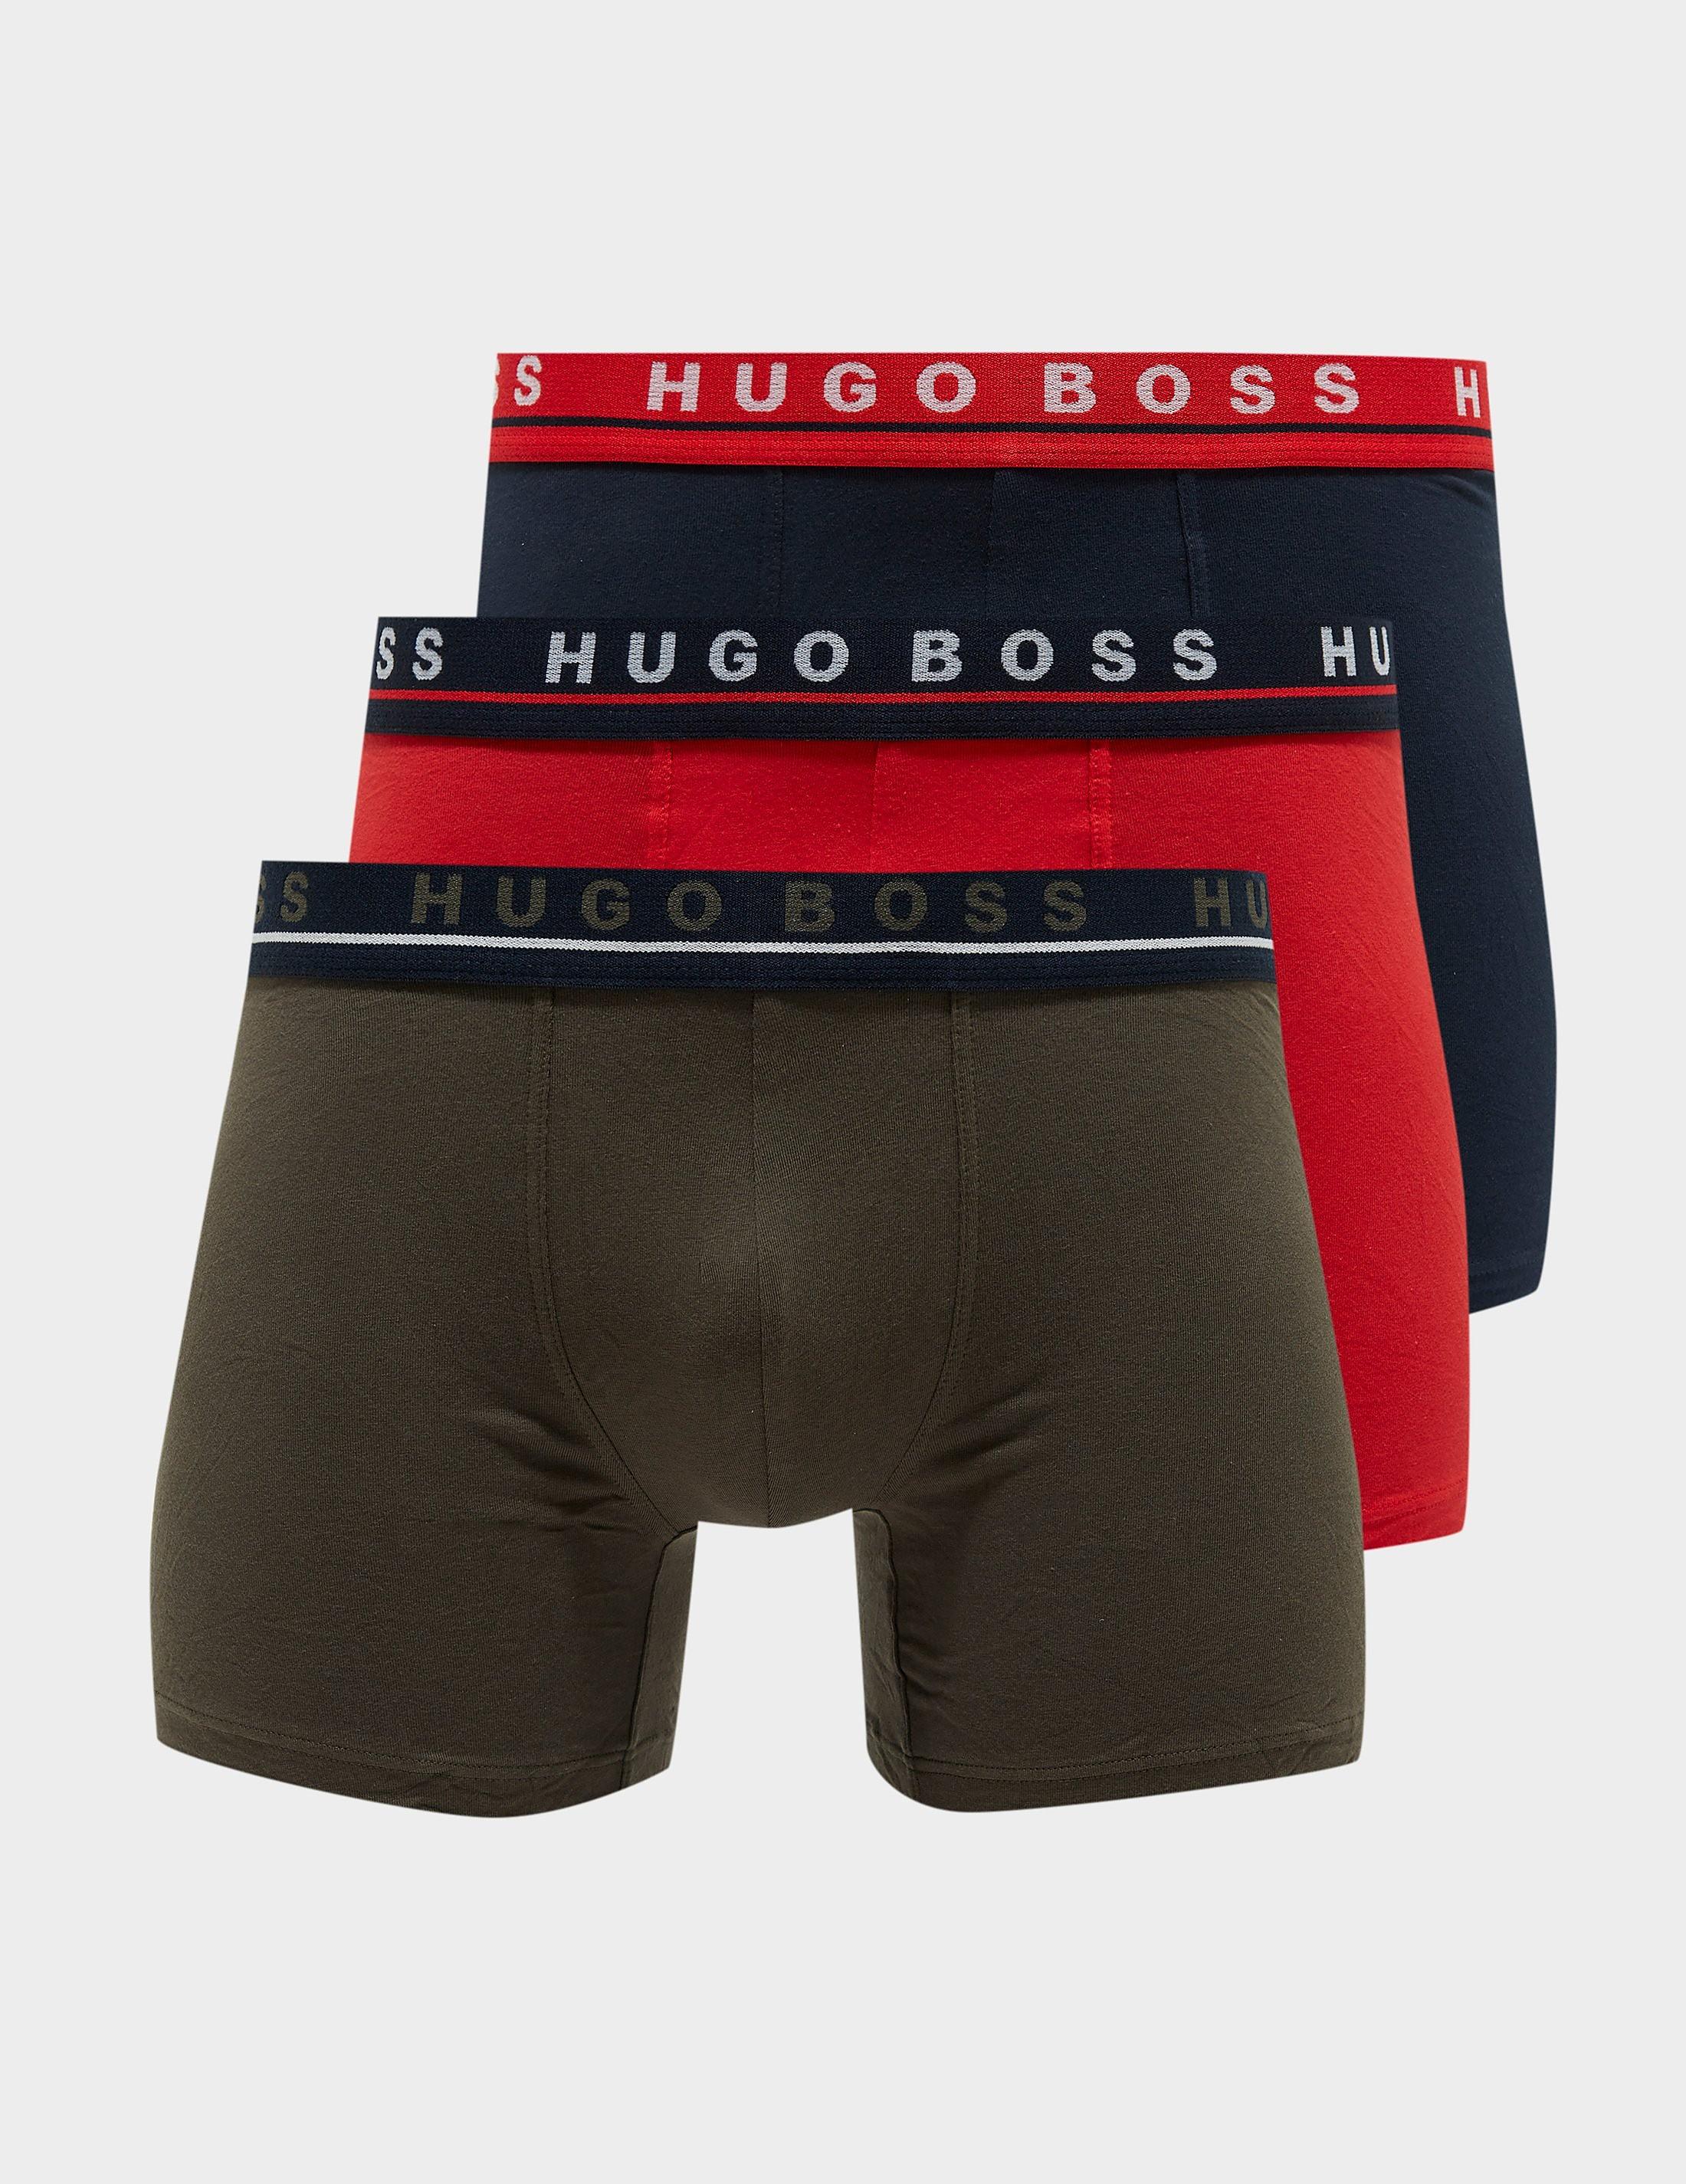 BOSS by Hugo Boss Cotton 3 Pack Boxer Shorts in Red for Men - Lyst